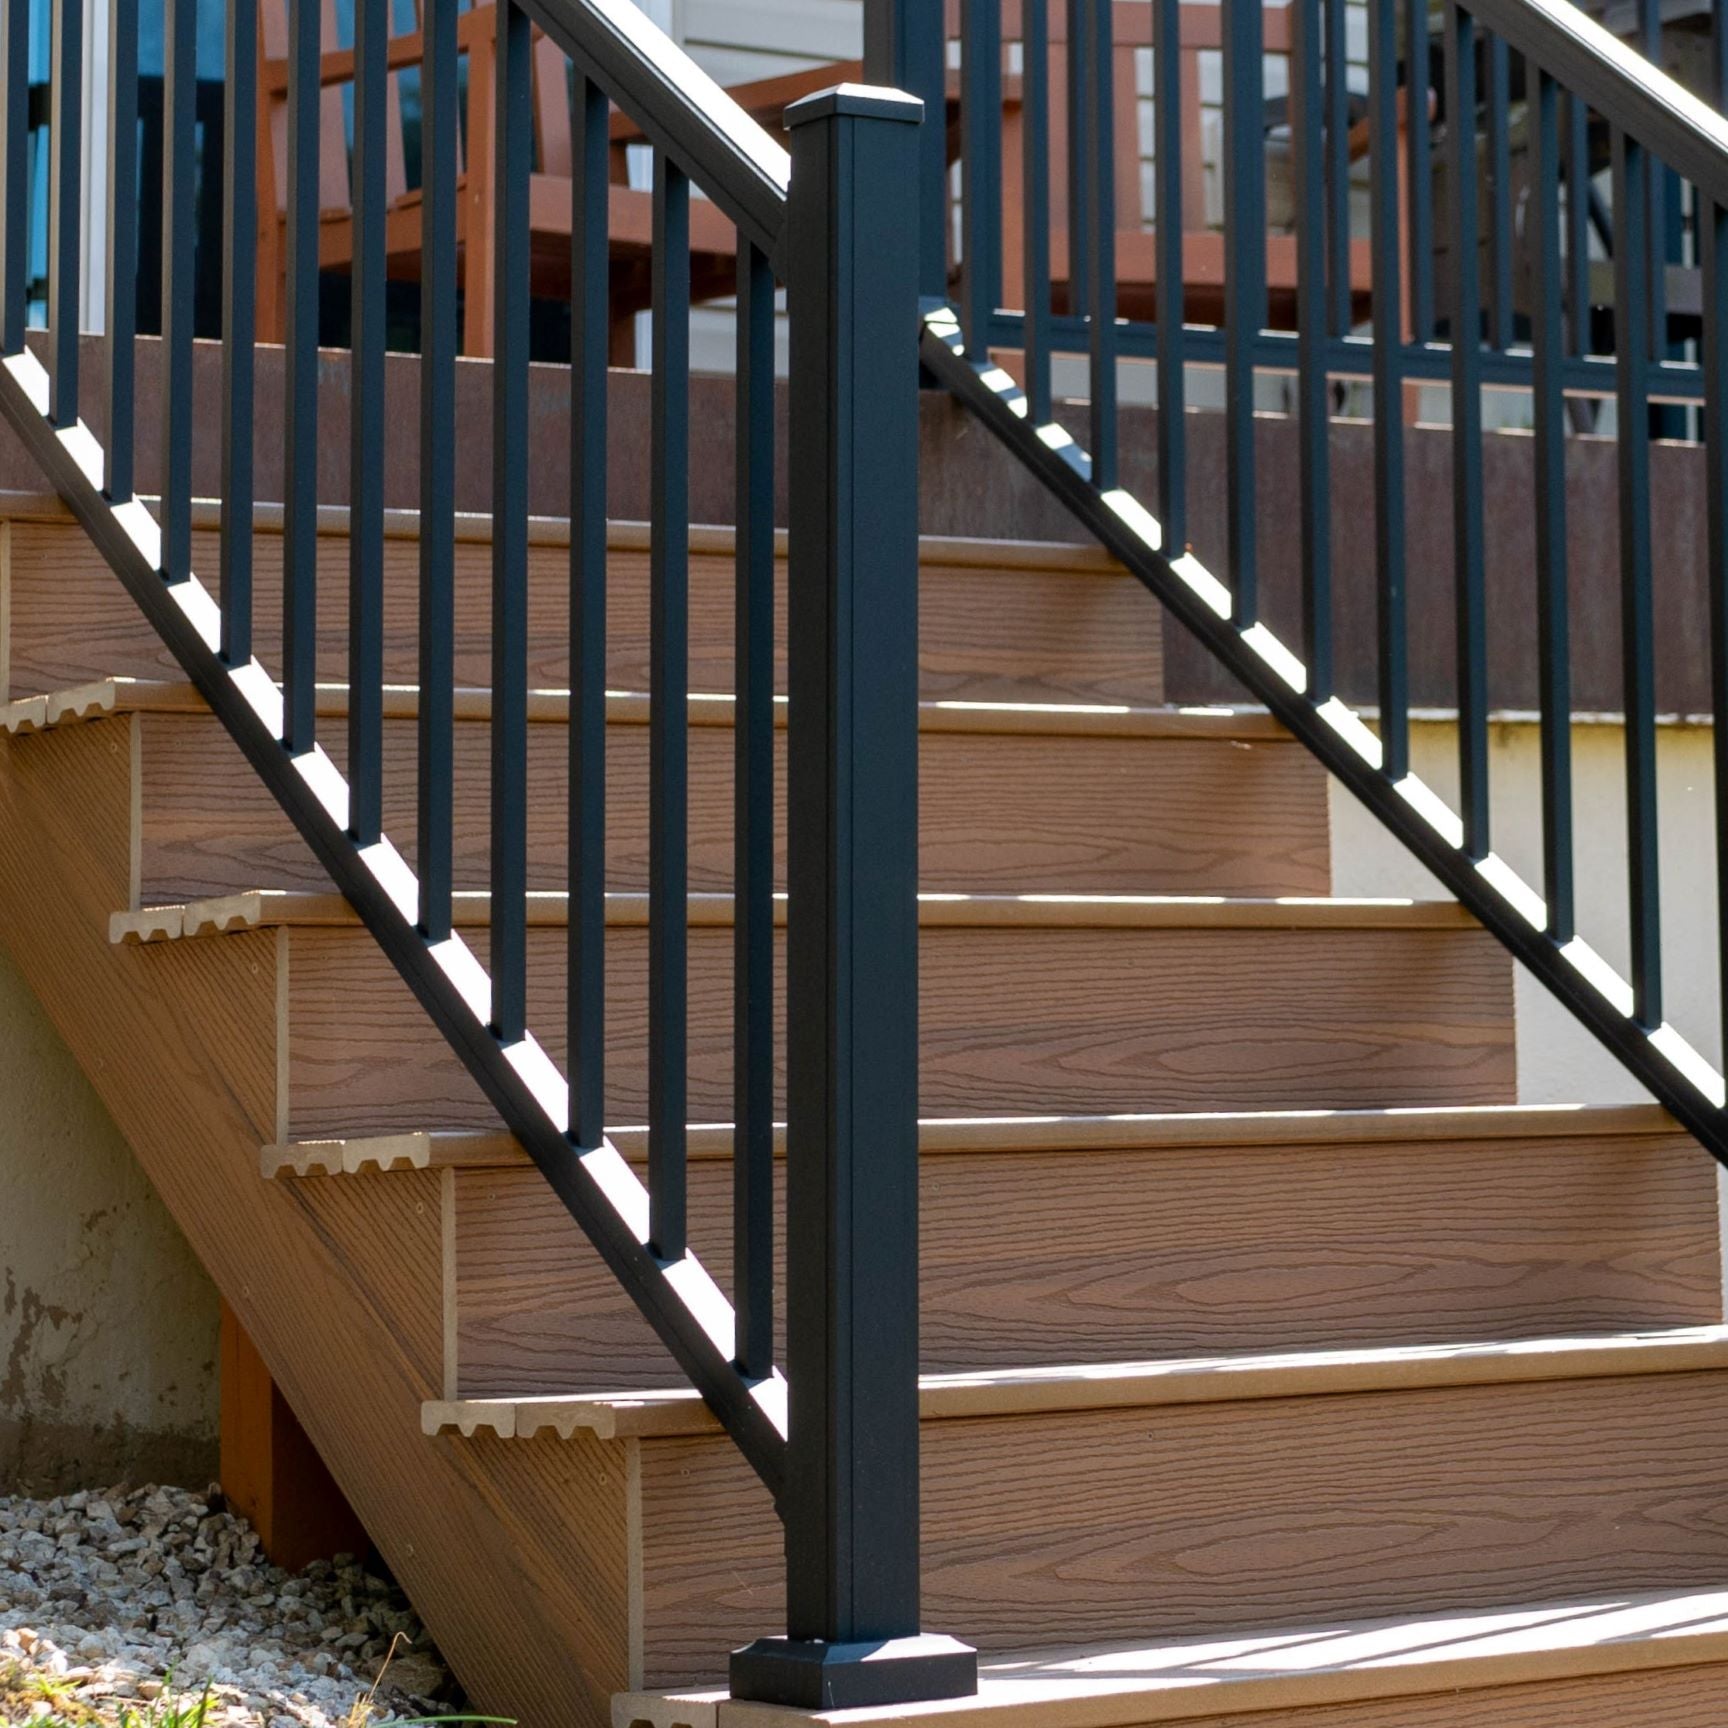 Advantage 44" Post (cap and flair not included) is used at the bottom of stair railing. Railing sold seperatly.